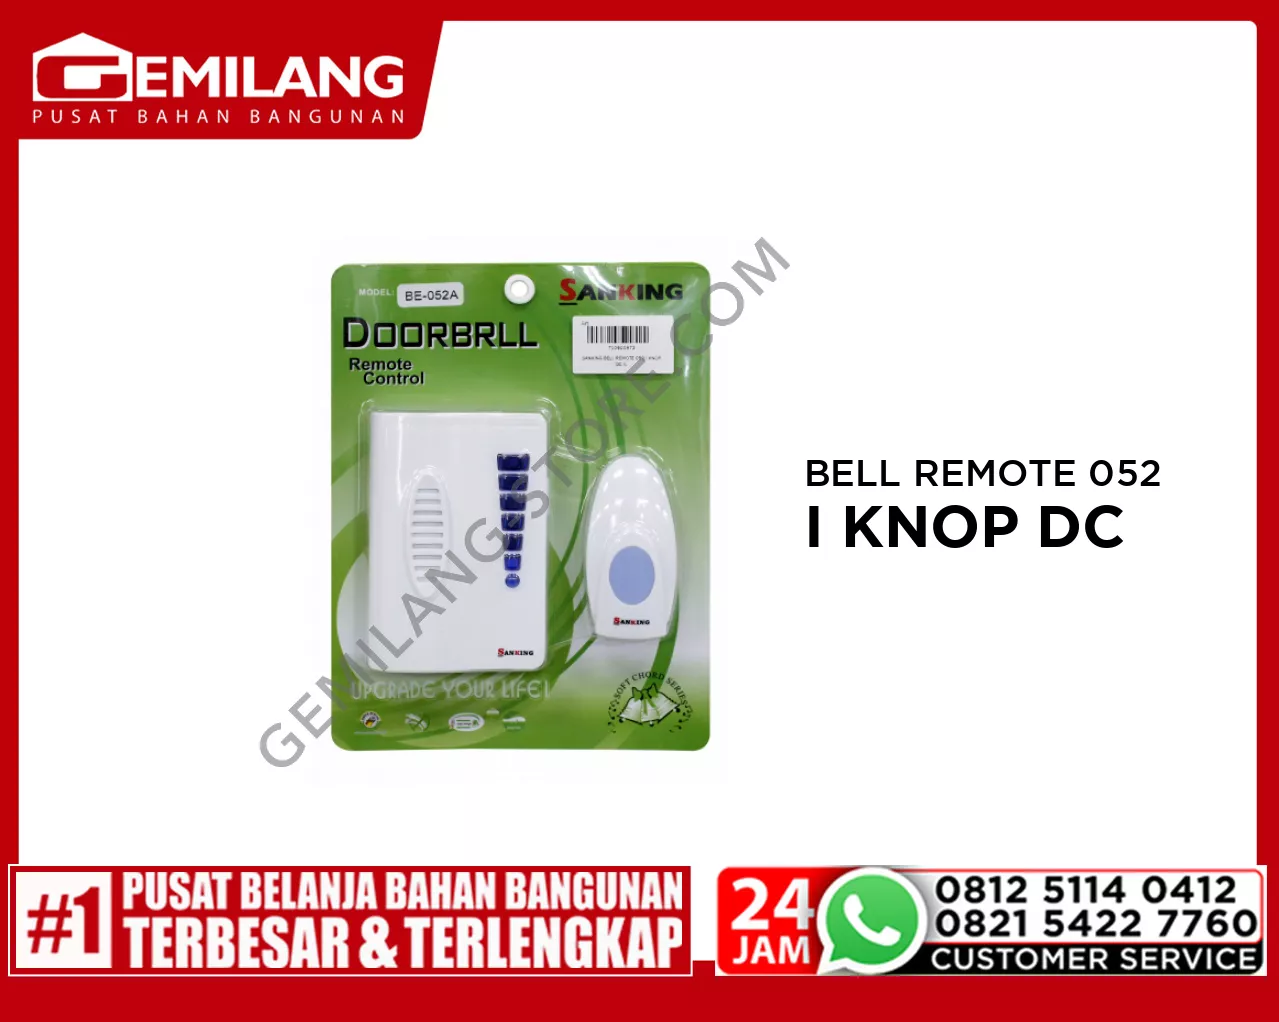 IL SANKING BELL REMOTE 052 I KNOP DC